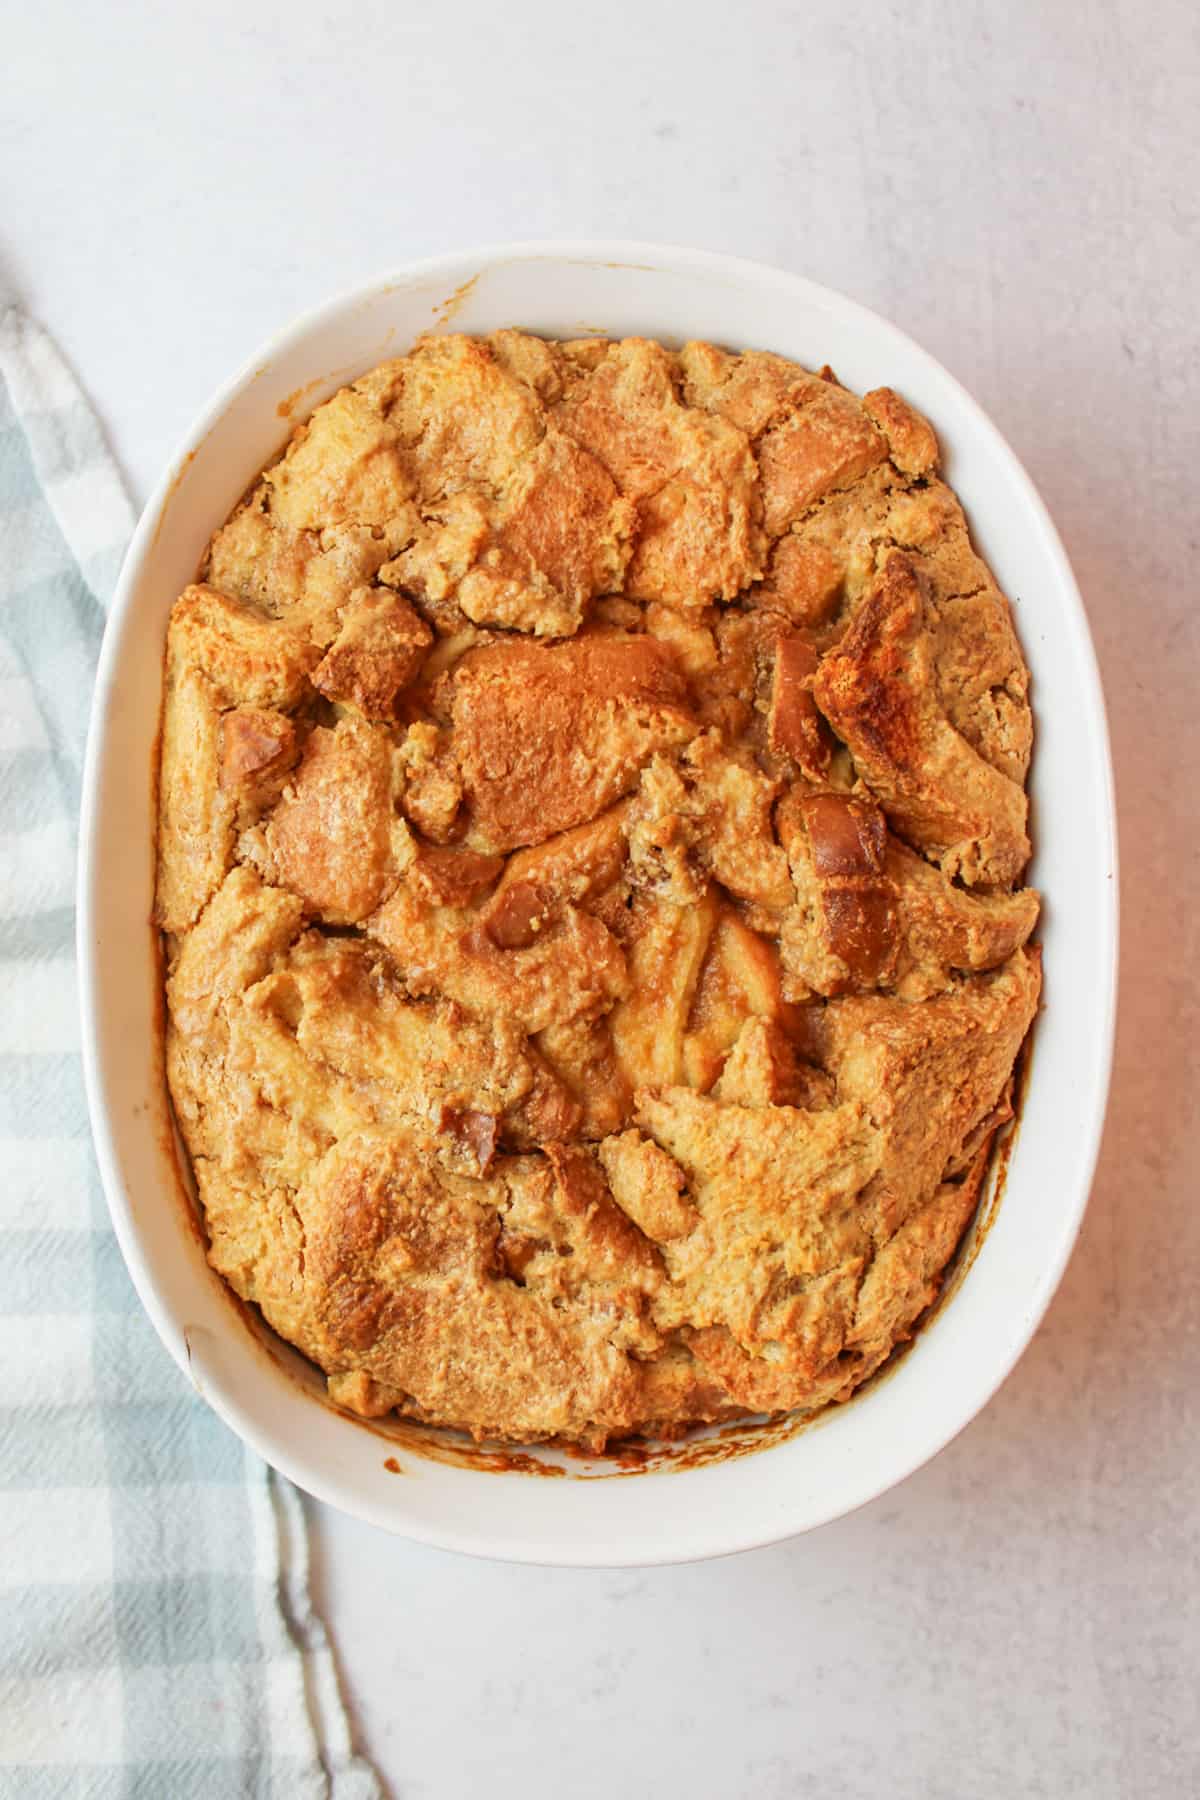 baked peanut butter bread pudding in an oval baking dish.